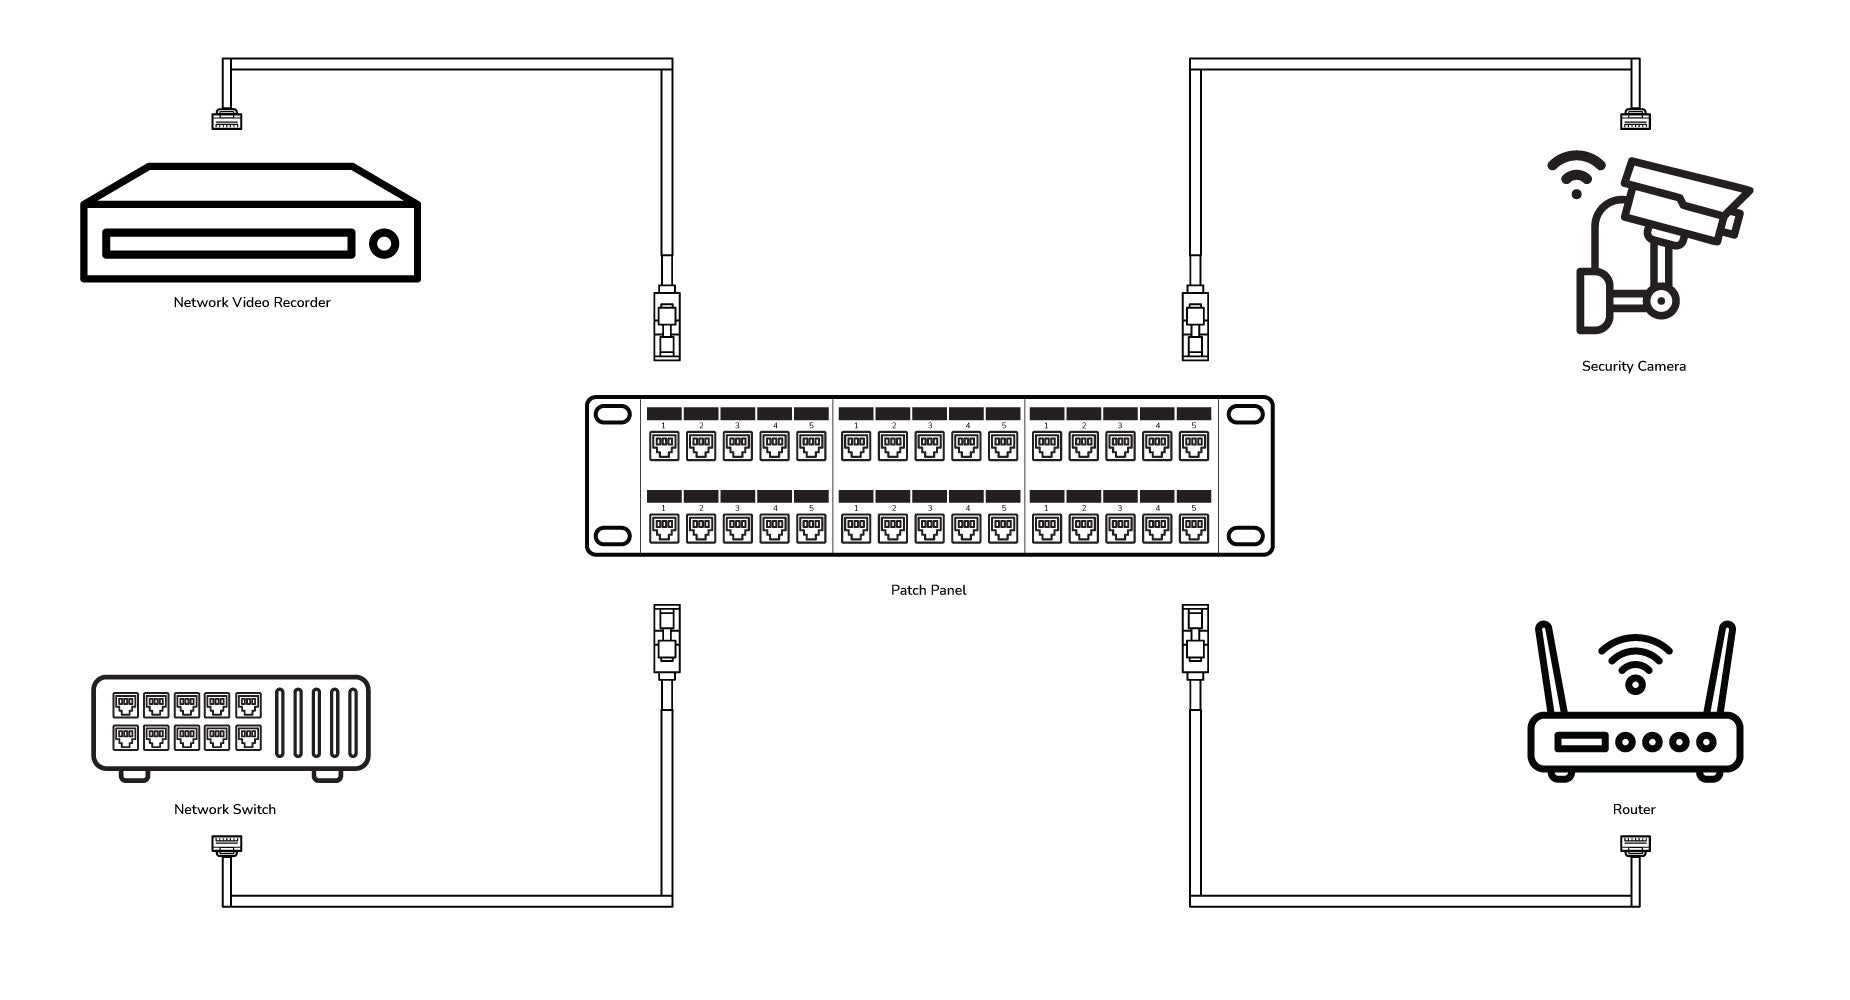 CAT5E Network 48-Port Patch Panel, 1U High Density, Strain Relief Support Bar